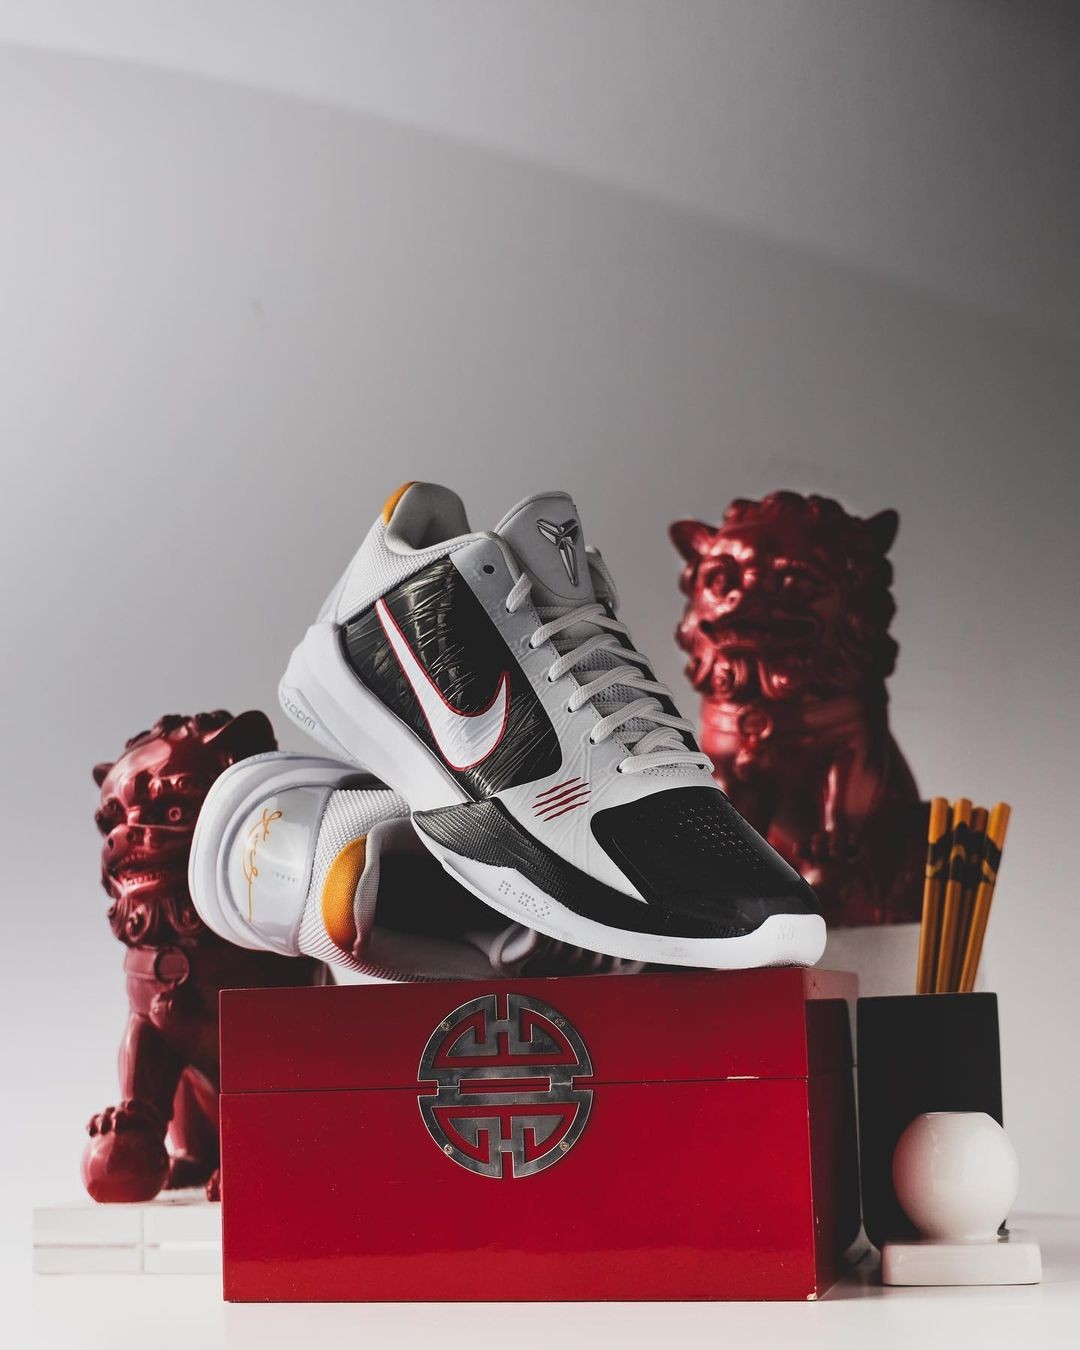 2020 Year In Review: A Welcome Alternative | SNEAKER THRONE